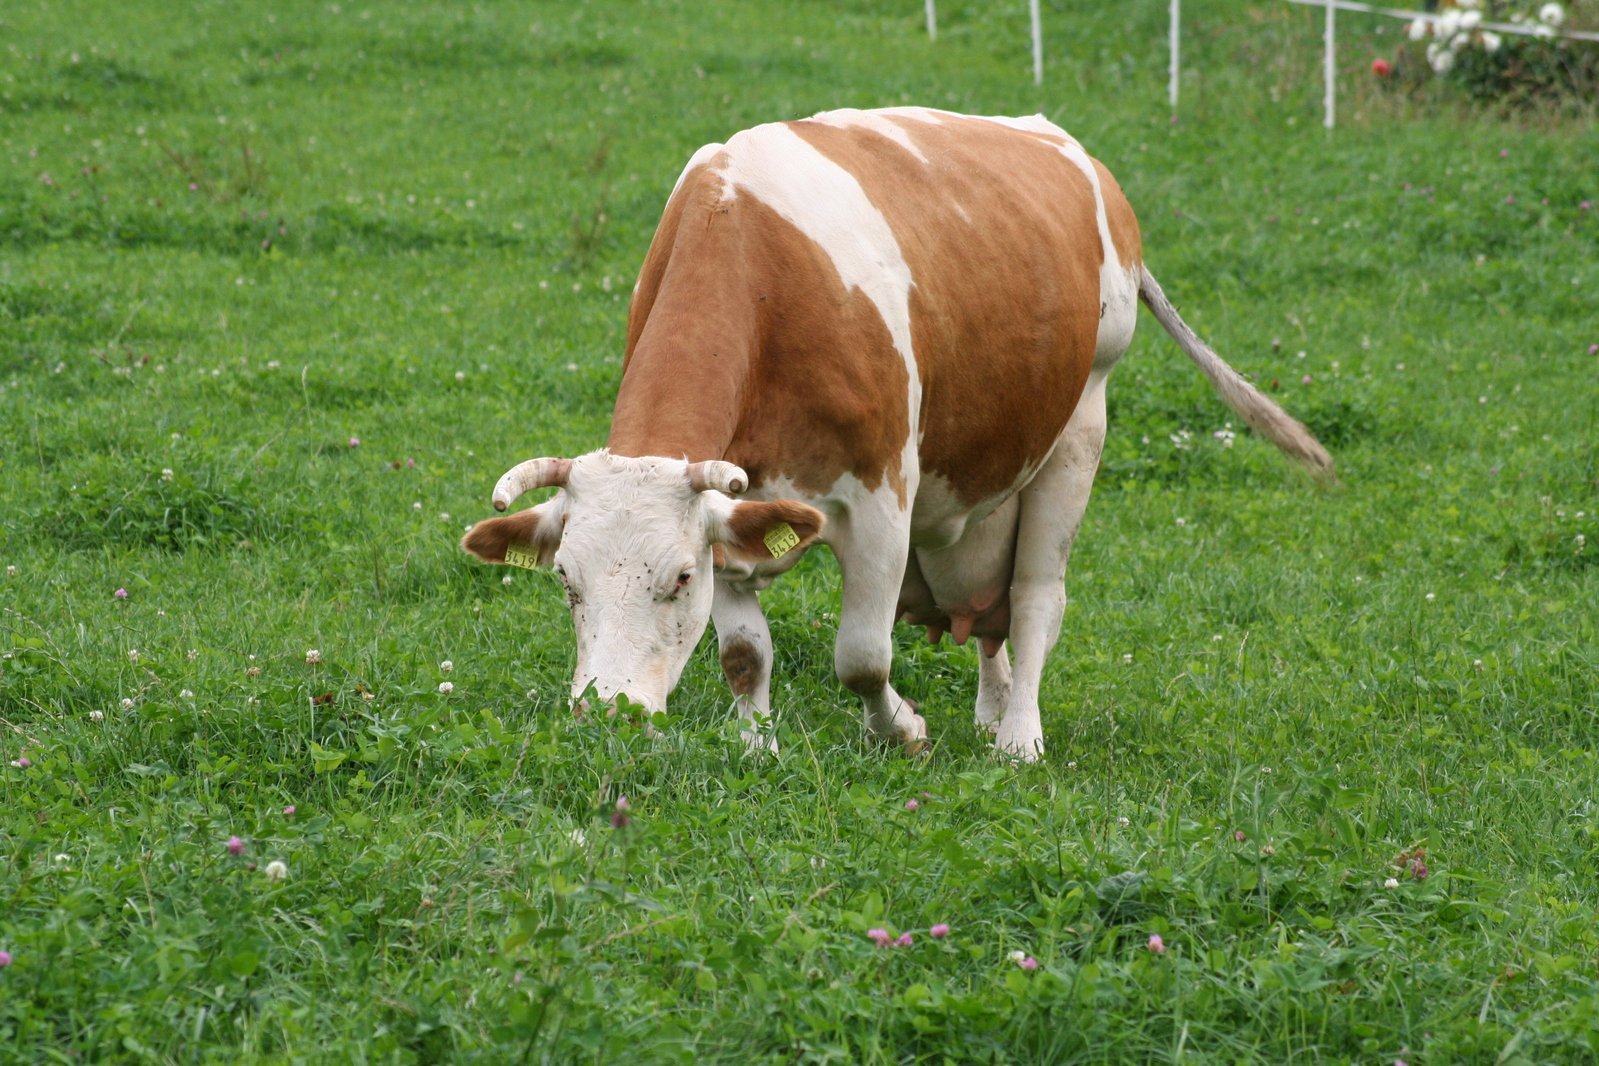 a cow is standing on the grass eating